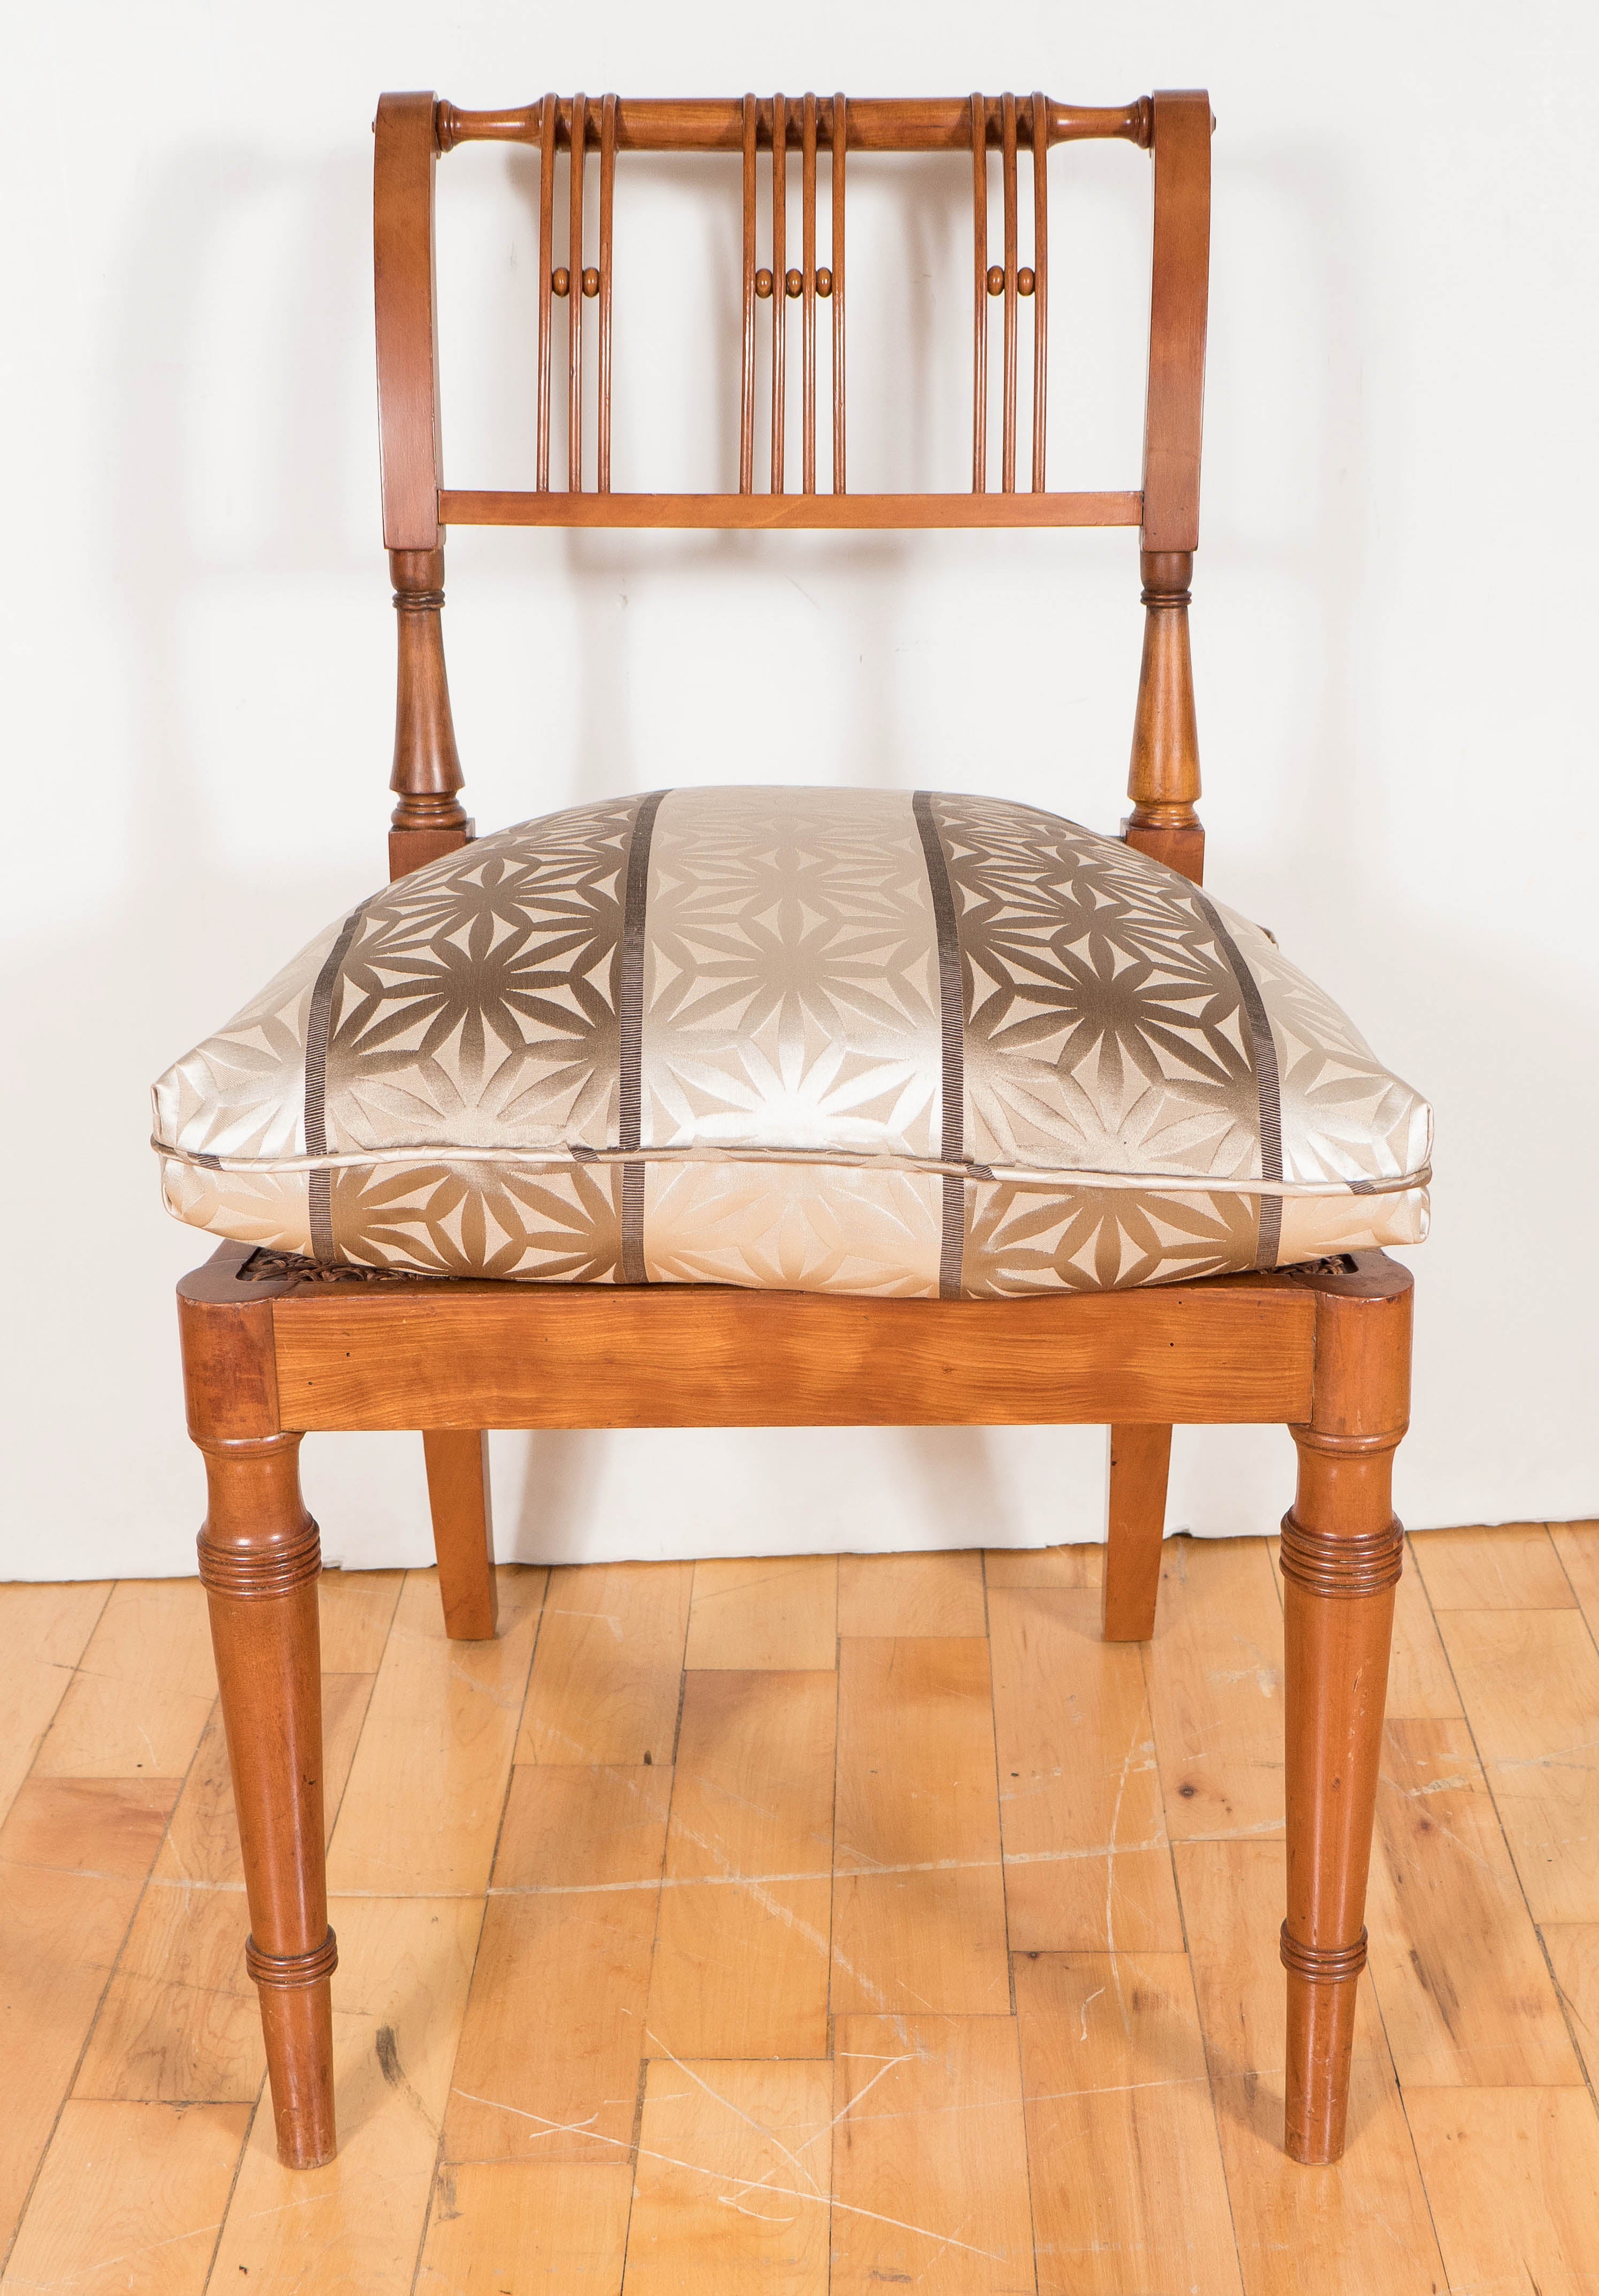 This Biedermeier chair was realized in cherrywood with a very comfortable seat cushion attractively decorated in a geometric design in cream and topaz silk patterns The backrest is curved with a tilted shoulder and ends in a volute -shaped scroll,